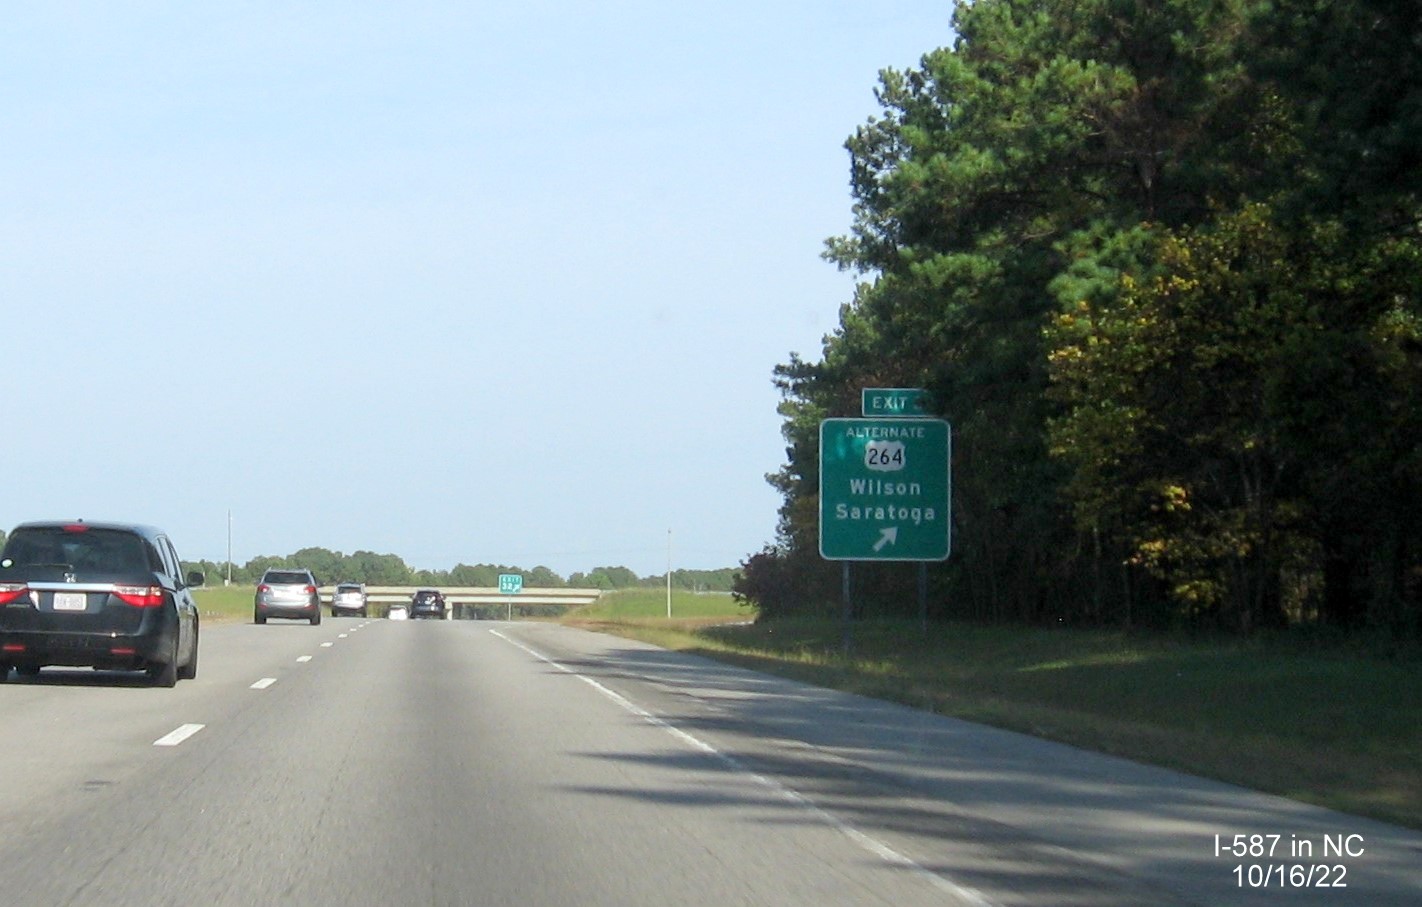 Image of ramp sign for US 264 East exit, still referring to Alt. US 264, with new I-587 milepost exit number on I-587/US 264 East in Saratoga,  October 2022